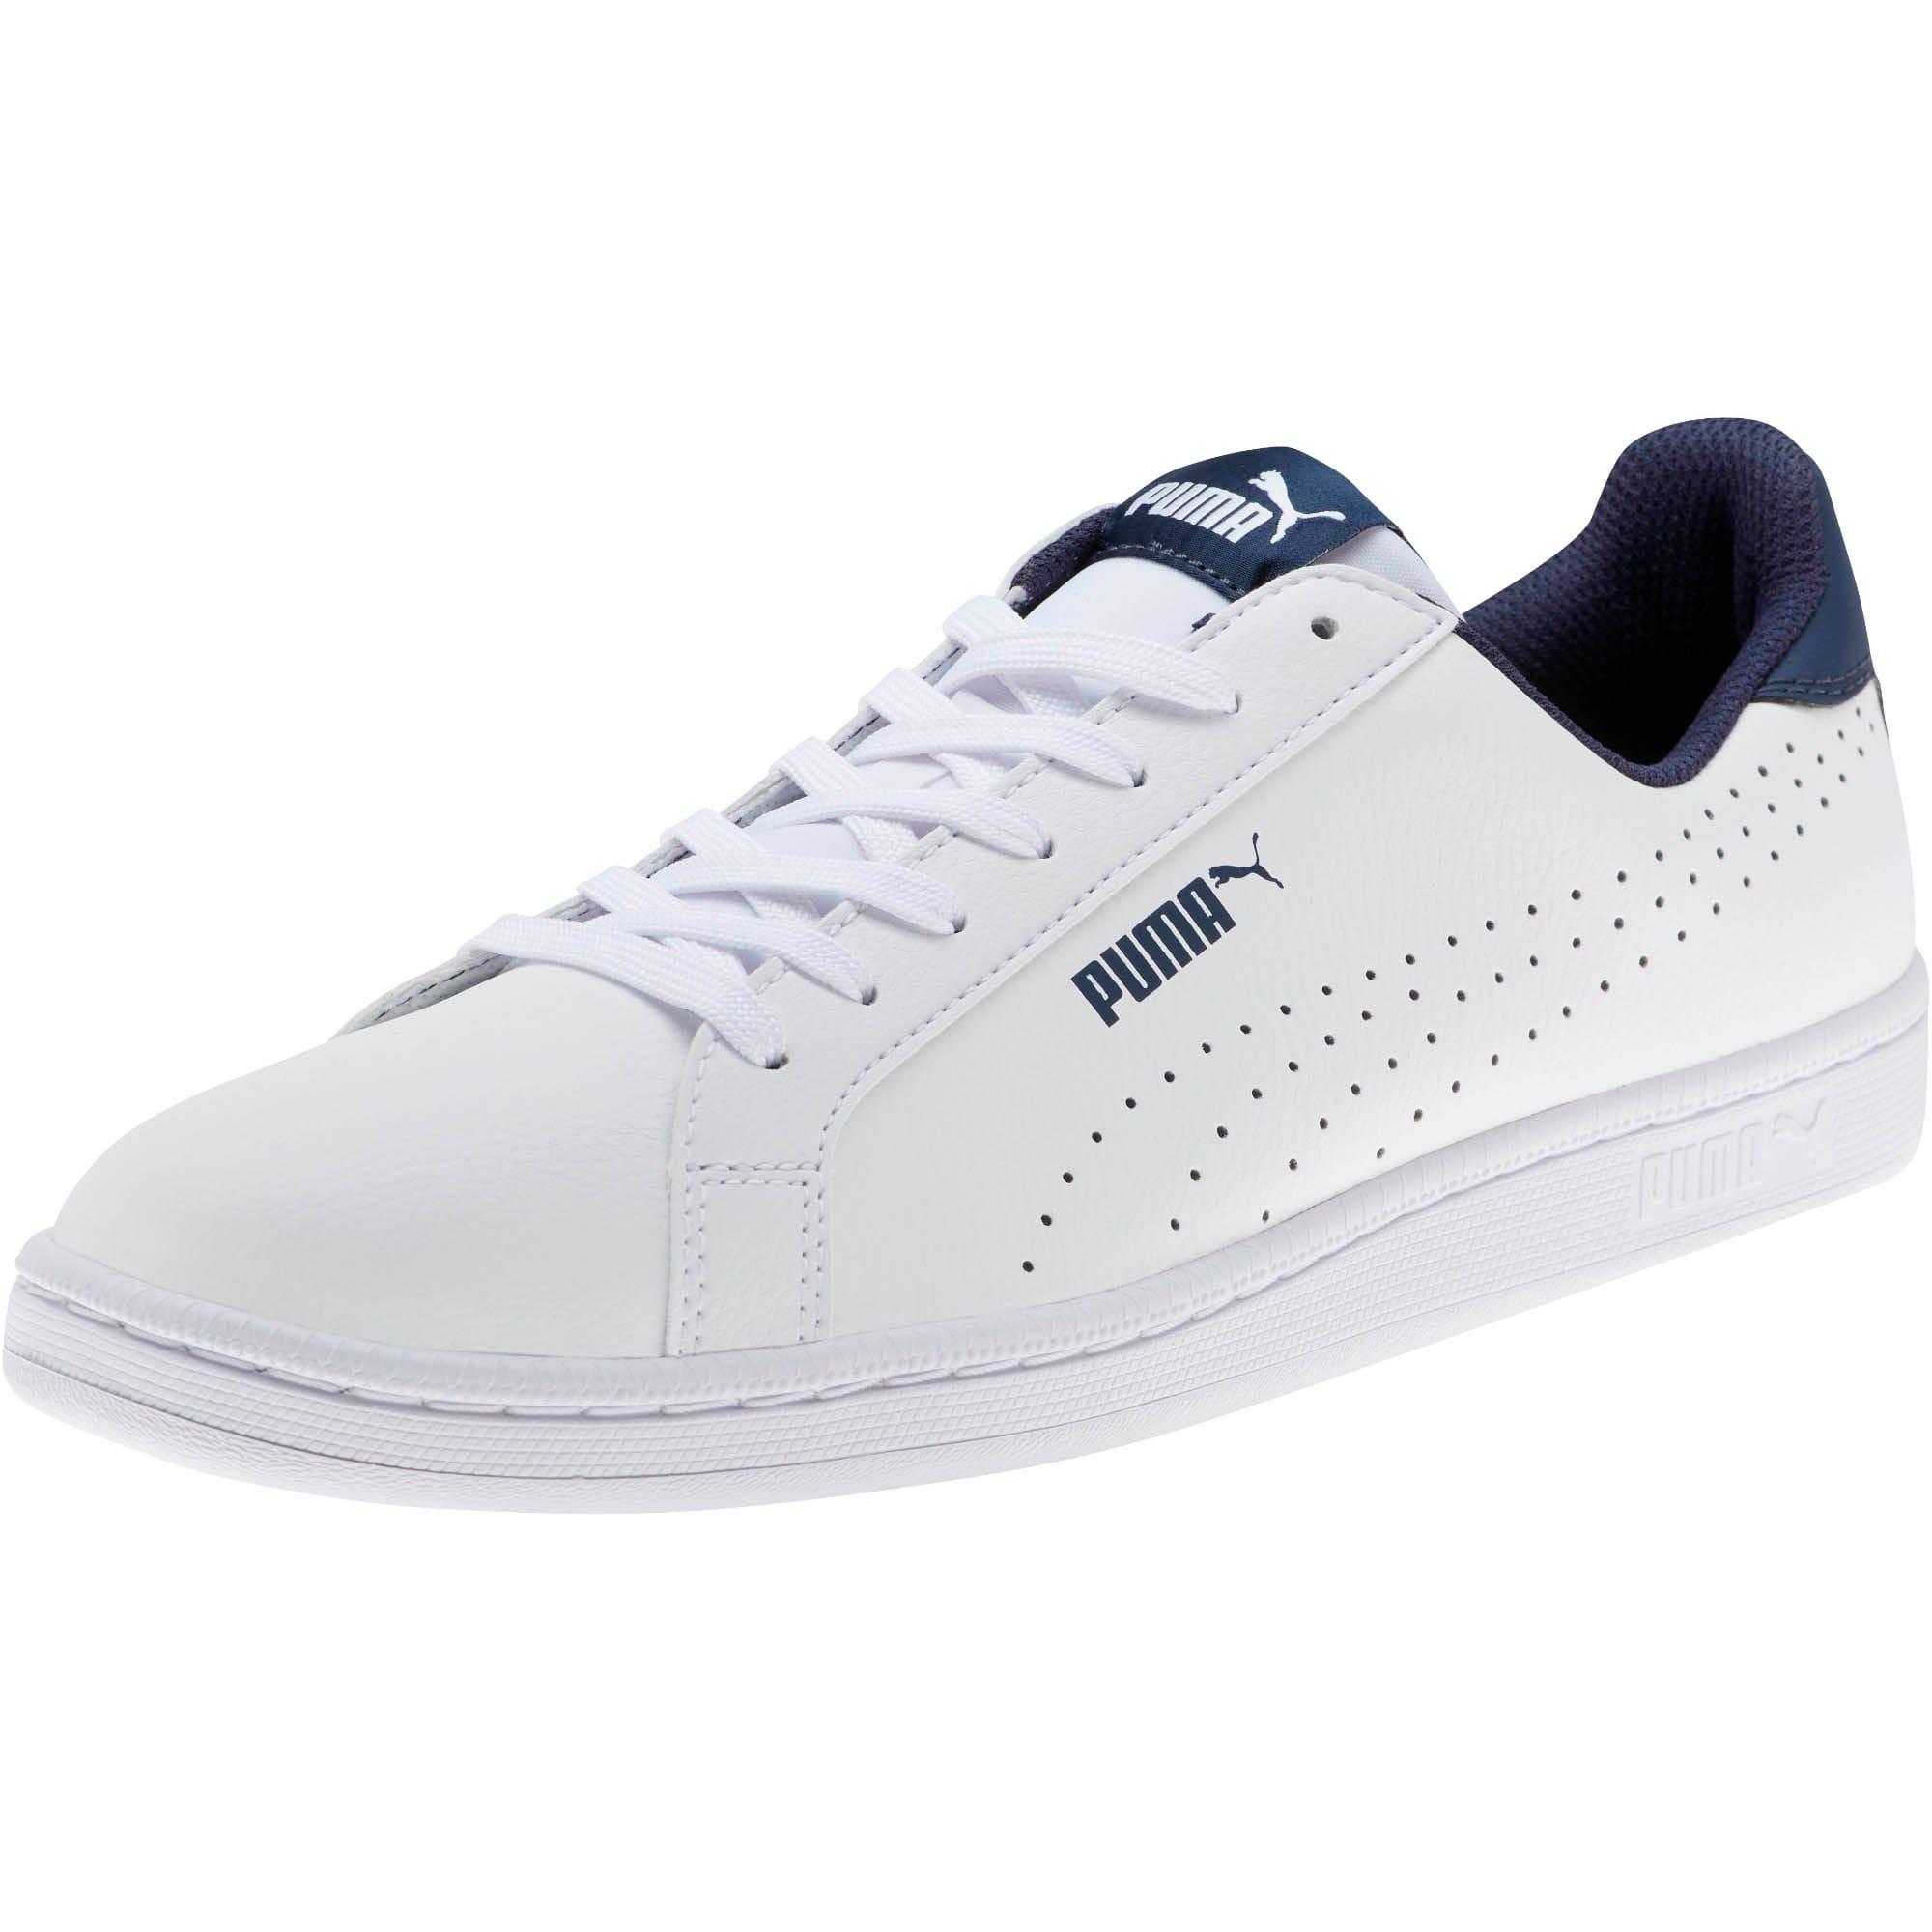 PUMA Leather Smash Perf Sneakers in White for Men - Lyst